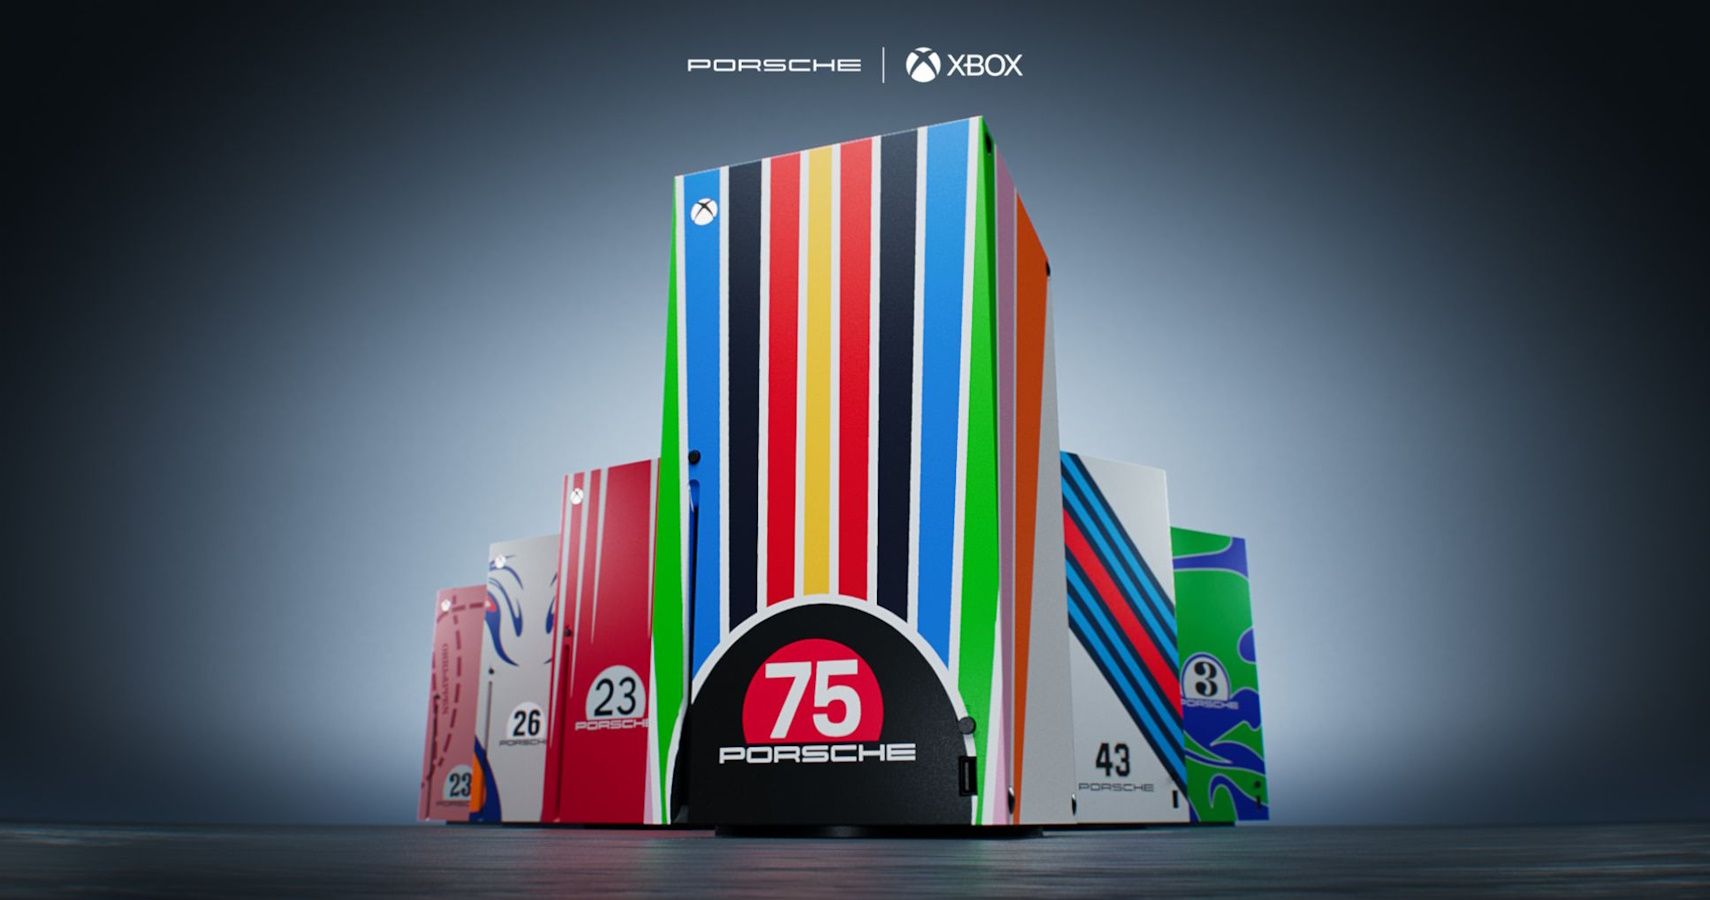 The six limited-edition Porsche-themed Xbox consoles